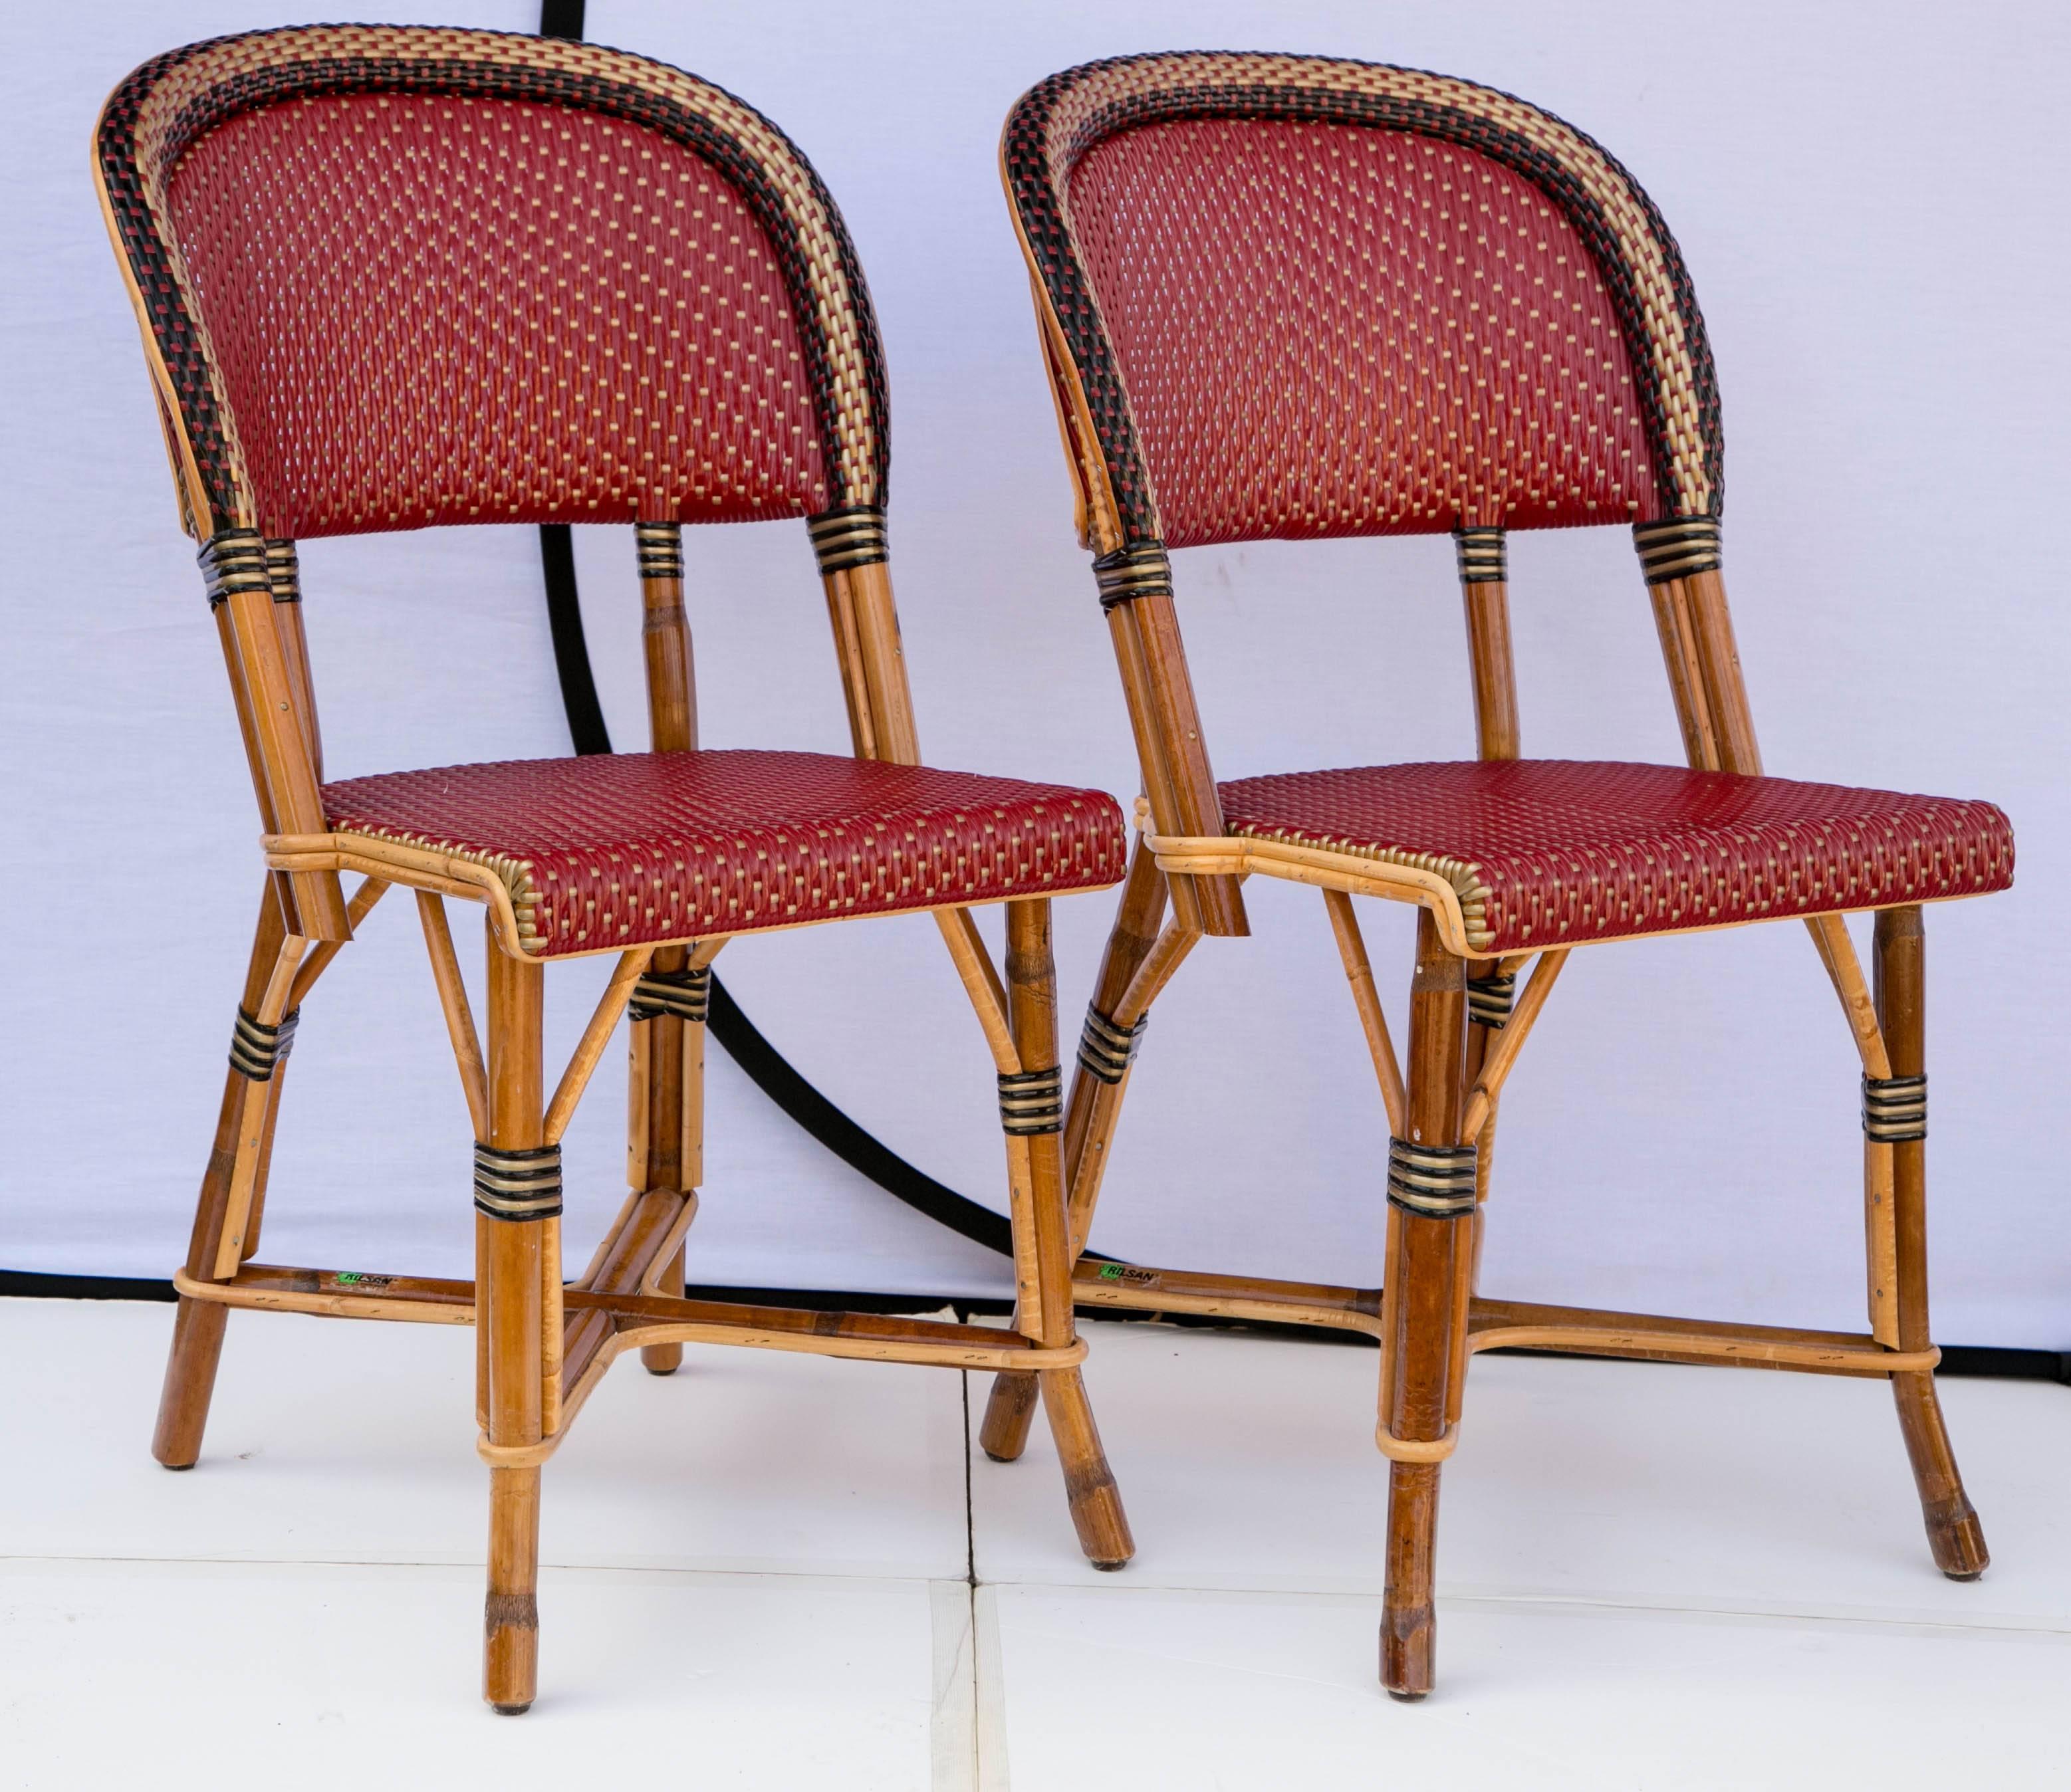 Fantastic authentic set of four Maison Drucker Bastille bistro chairs. Maison Drucker created furniture in rattan since the 19th century. Made of Rattan and Rilsan. Rilsan is not plastic - it is derived from the caster oil plant. Rilsan is virtually